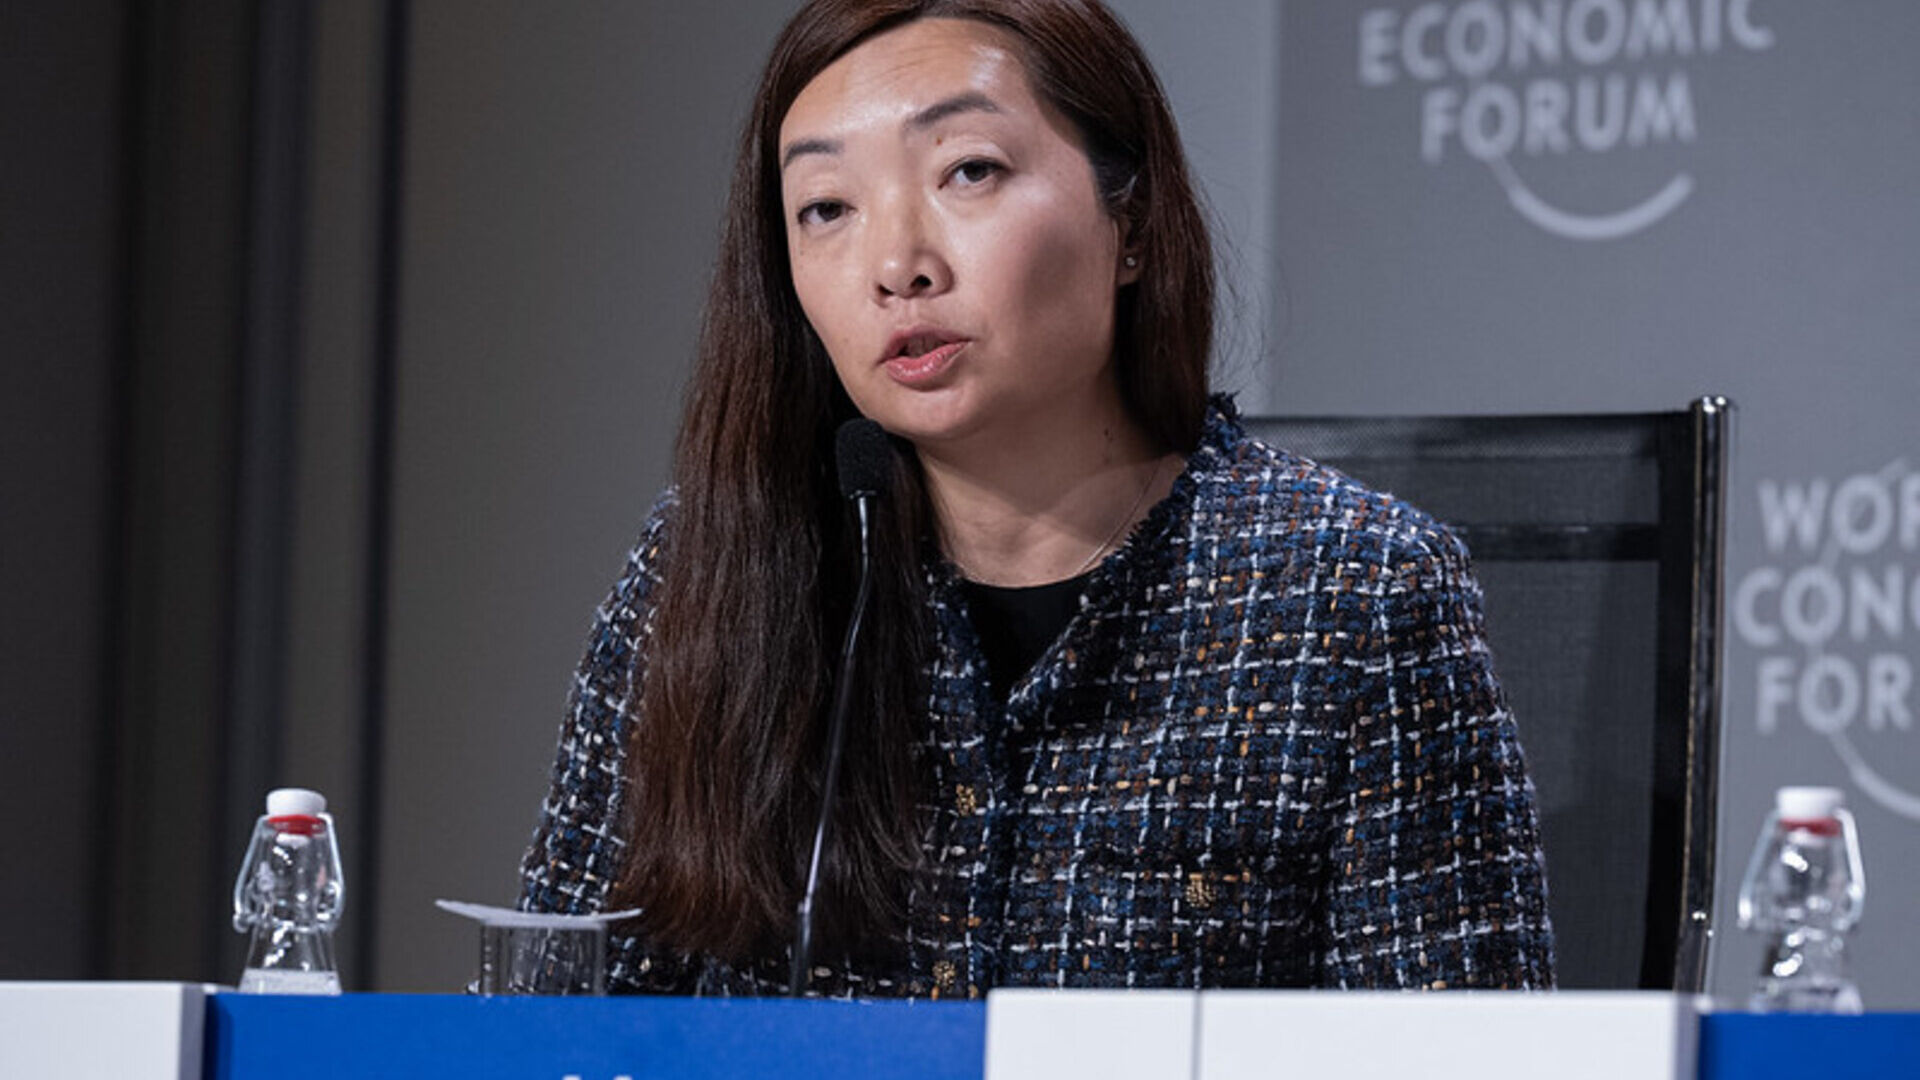 International Computation and AI Network: Cathy Li is Head of AI, Data and Metavese at the World Economic Forum